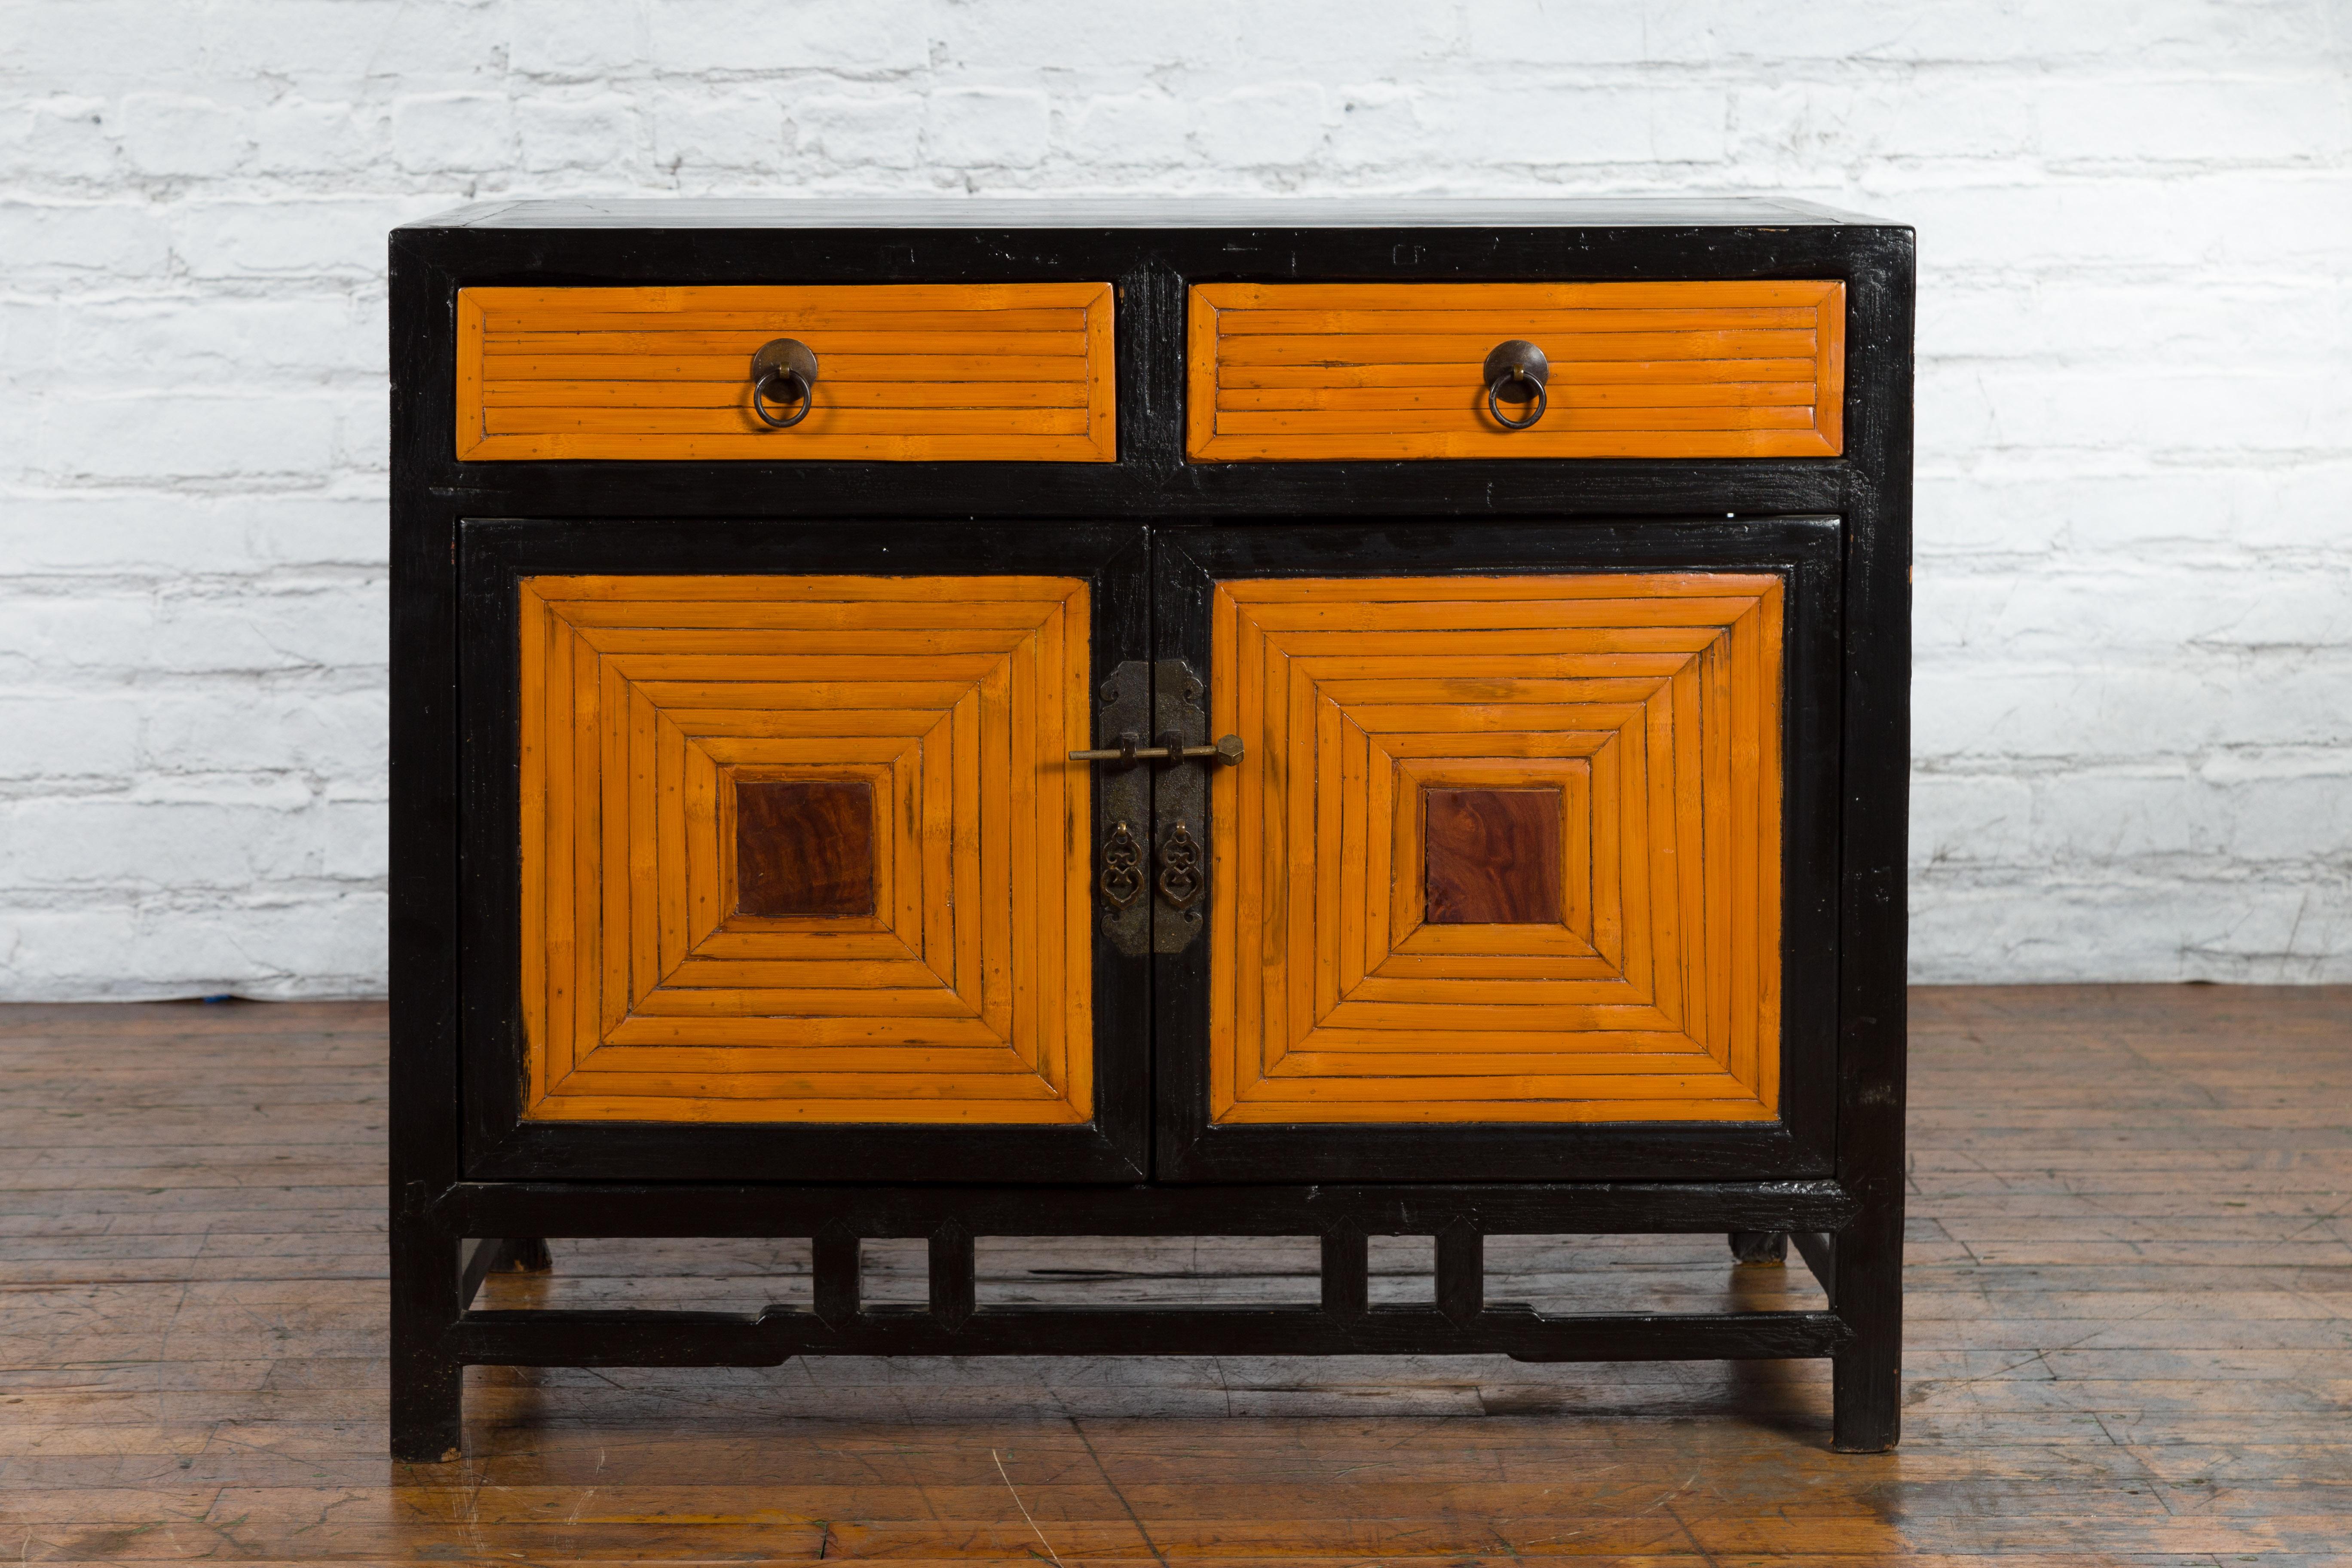 A Chinese Art Deco period two-toned black lacquer side cabinet from the early 20th century, with bamboo design and petite burl wood panels. Created in China during the Art Deco period, this side cabinet features a rectangular top with central board,